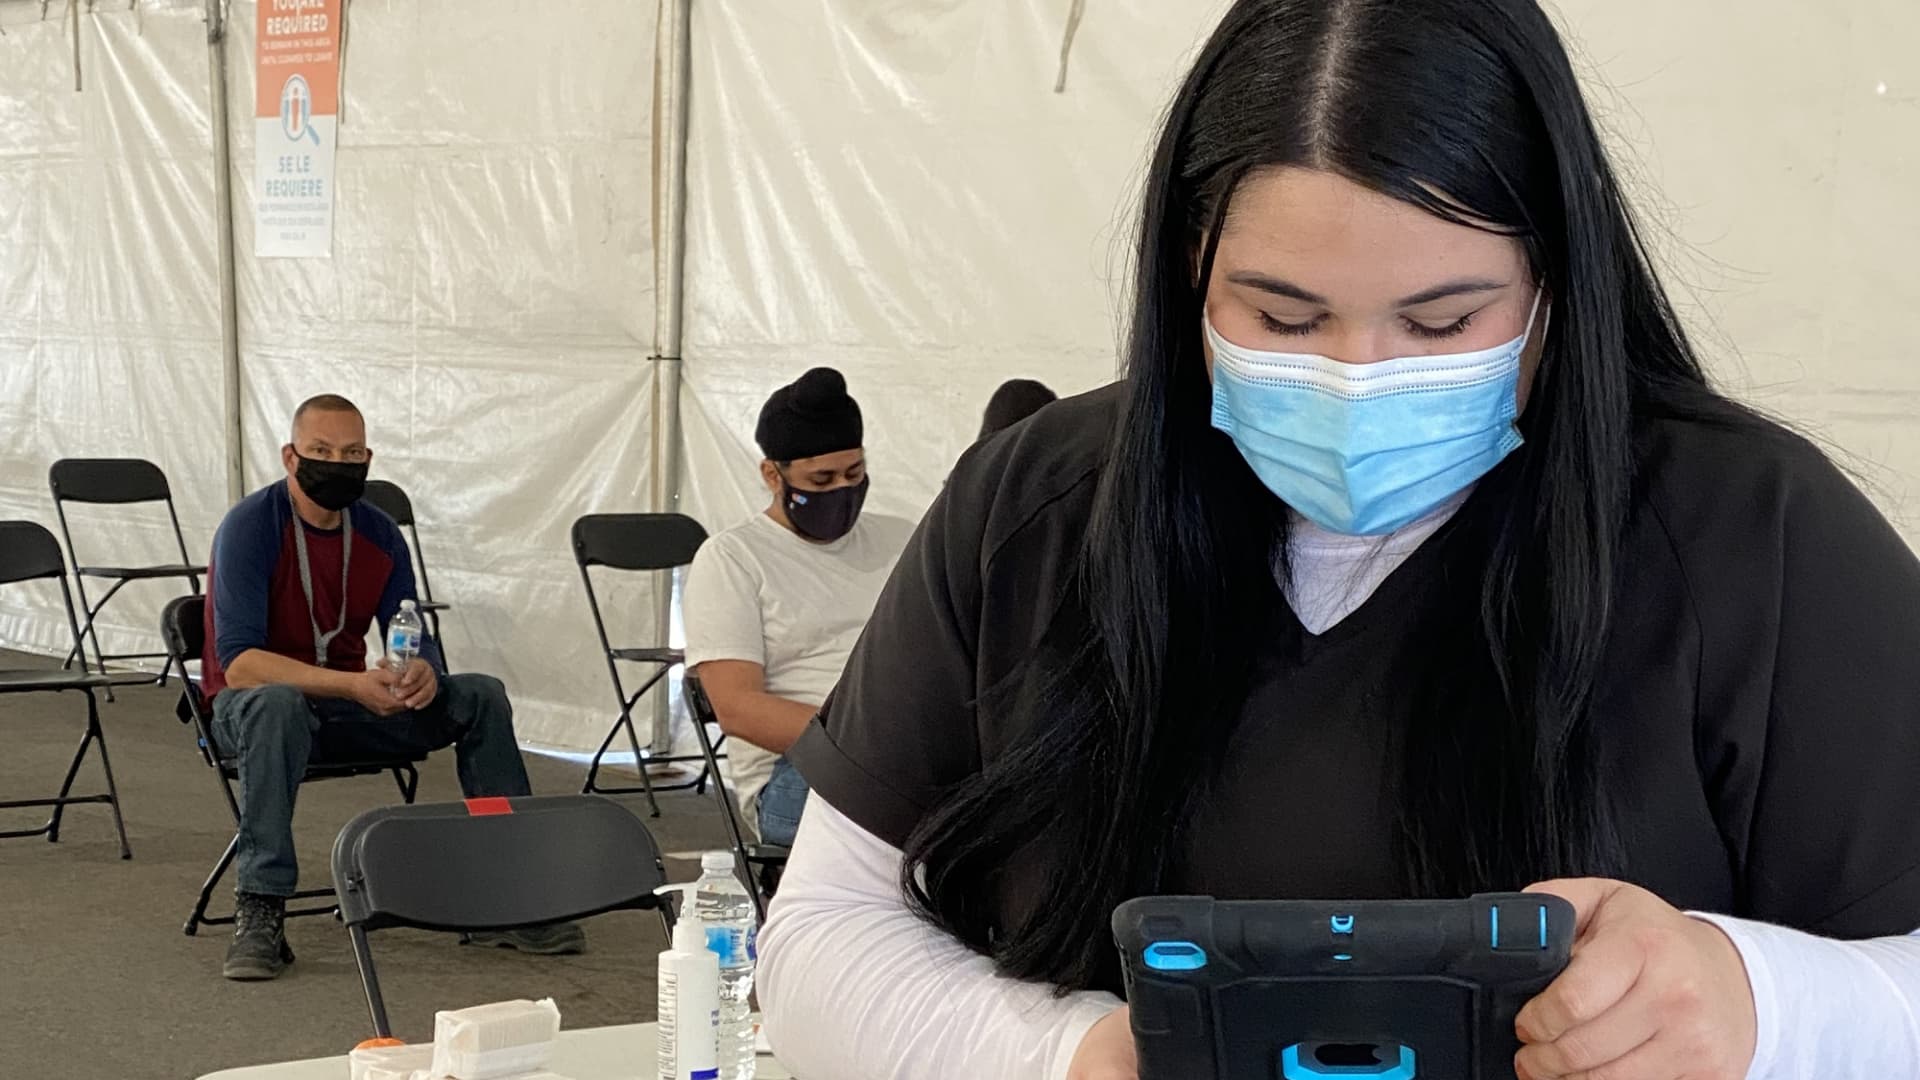 Bolthouse Farms employees at the company's Covid vaccine clinic in Bakersfield, California.